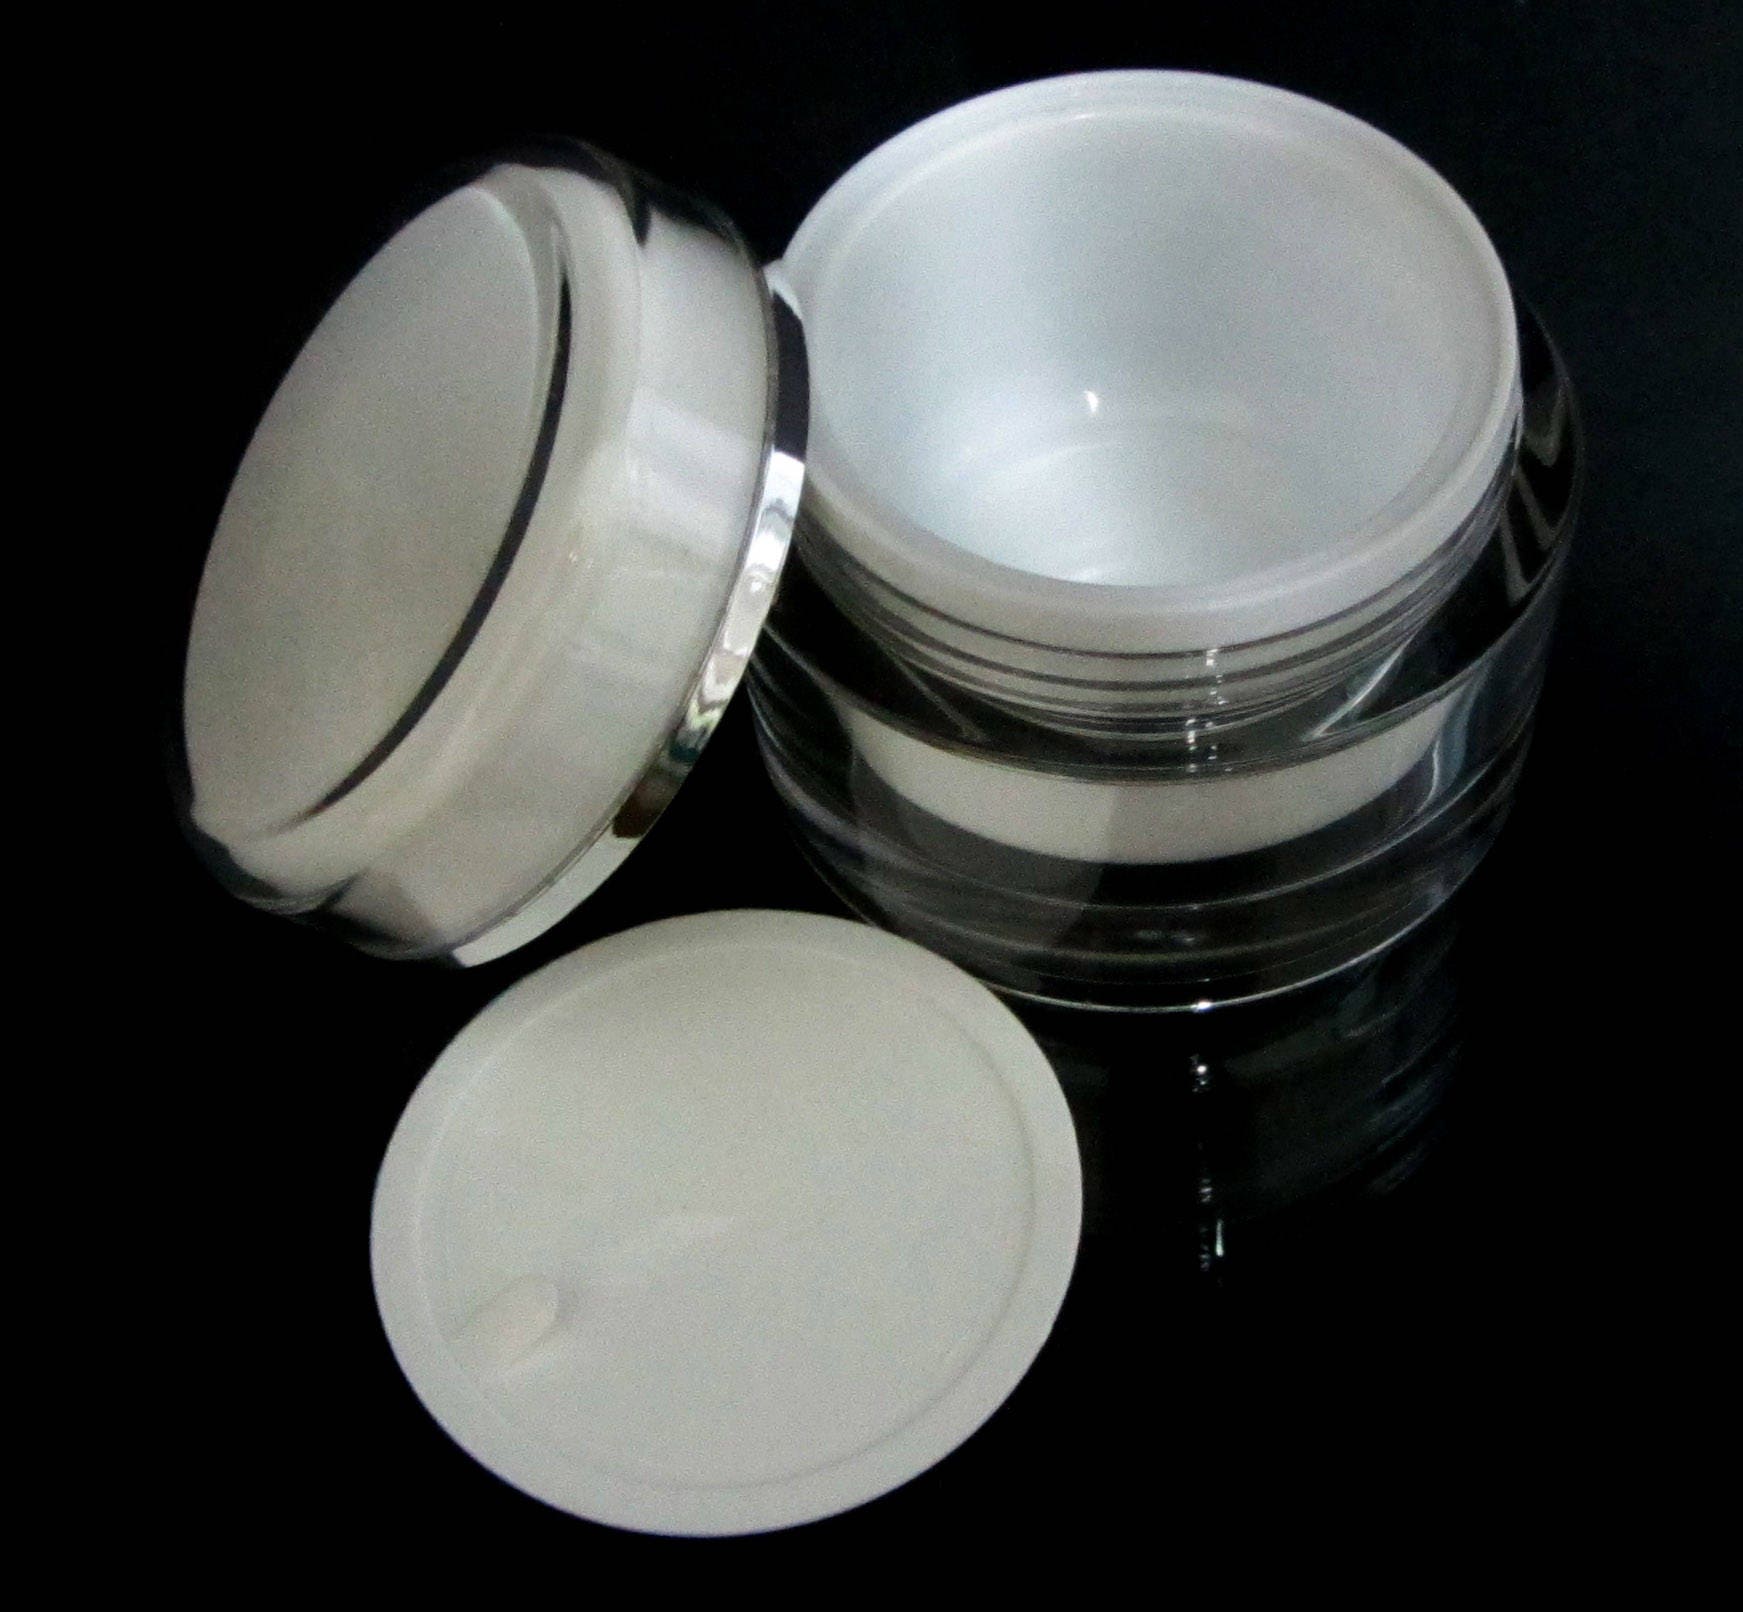 50 Acrylic Cosmetic Cream Jar Elegant Beauty Containers w/ Sealing Disc 50 ML (3150-50) Discount Cosmetic Jars